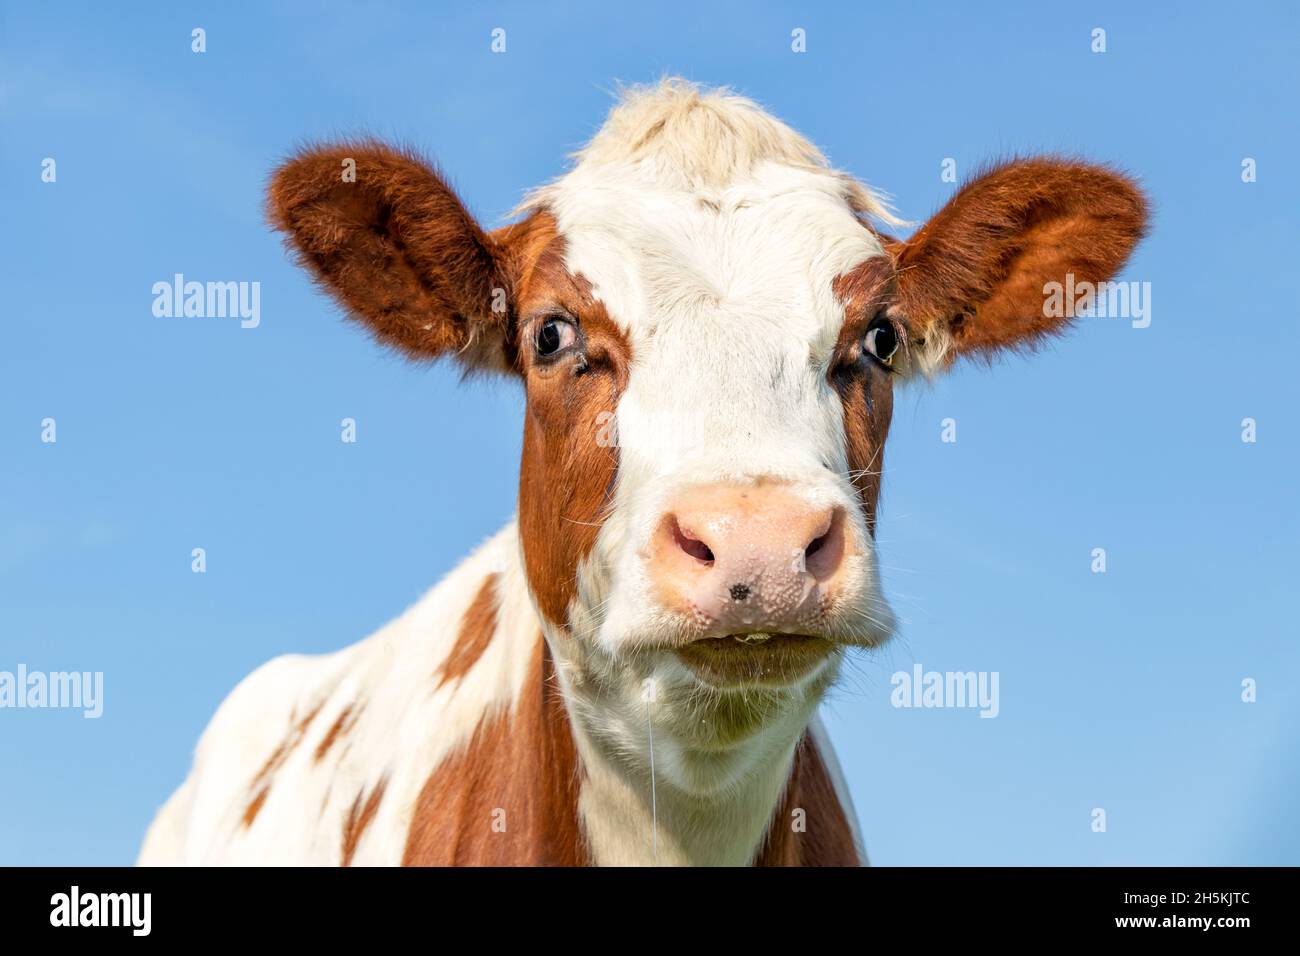 Cute cow head, red fur with droopy eyes and pink nose, lovely drooling and innocent on a blue background. Stock Photo